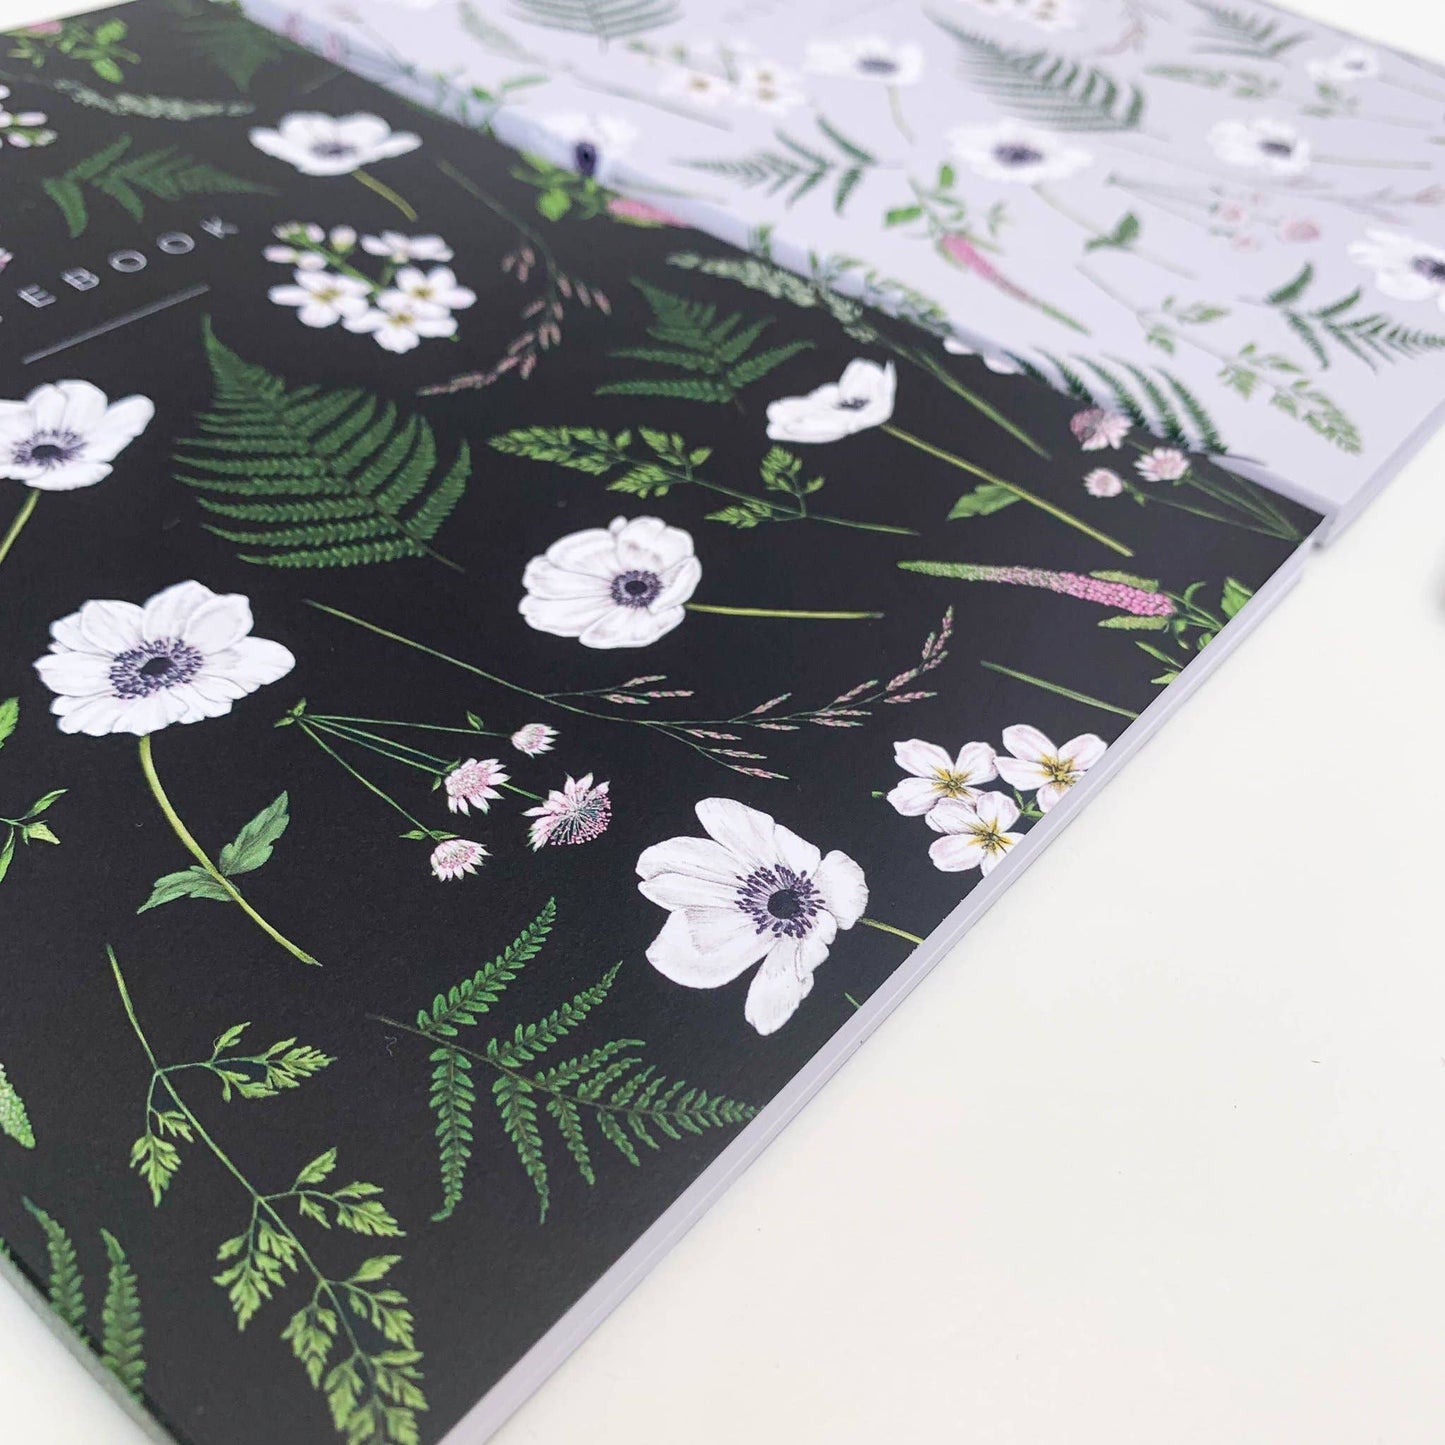 Catherine Lewis Design - Wild Meadow - Pack of 2 A5 Notebooks